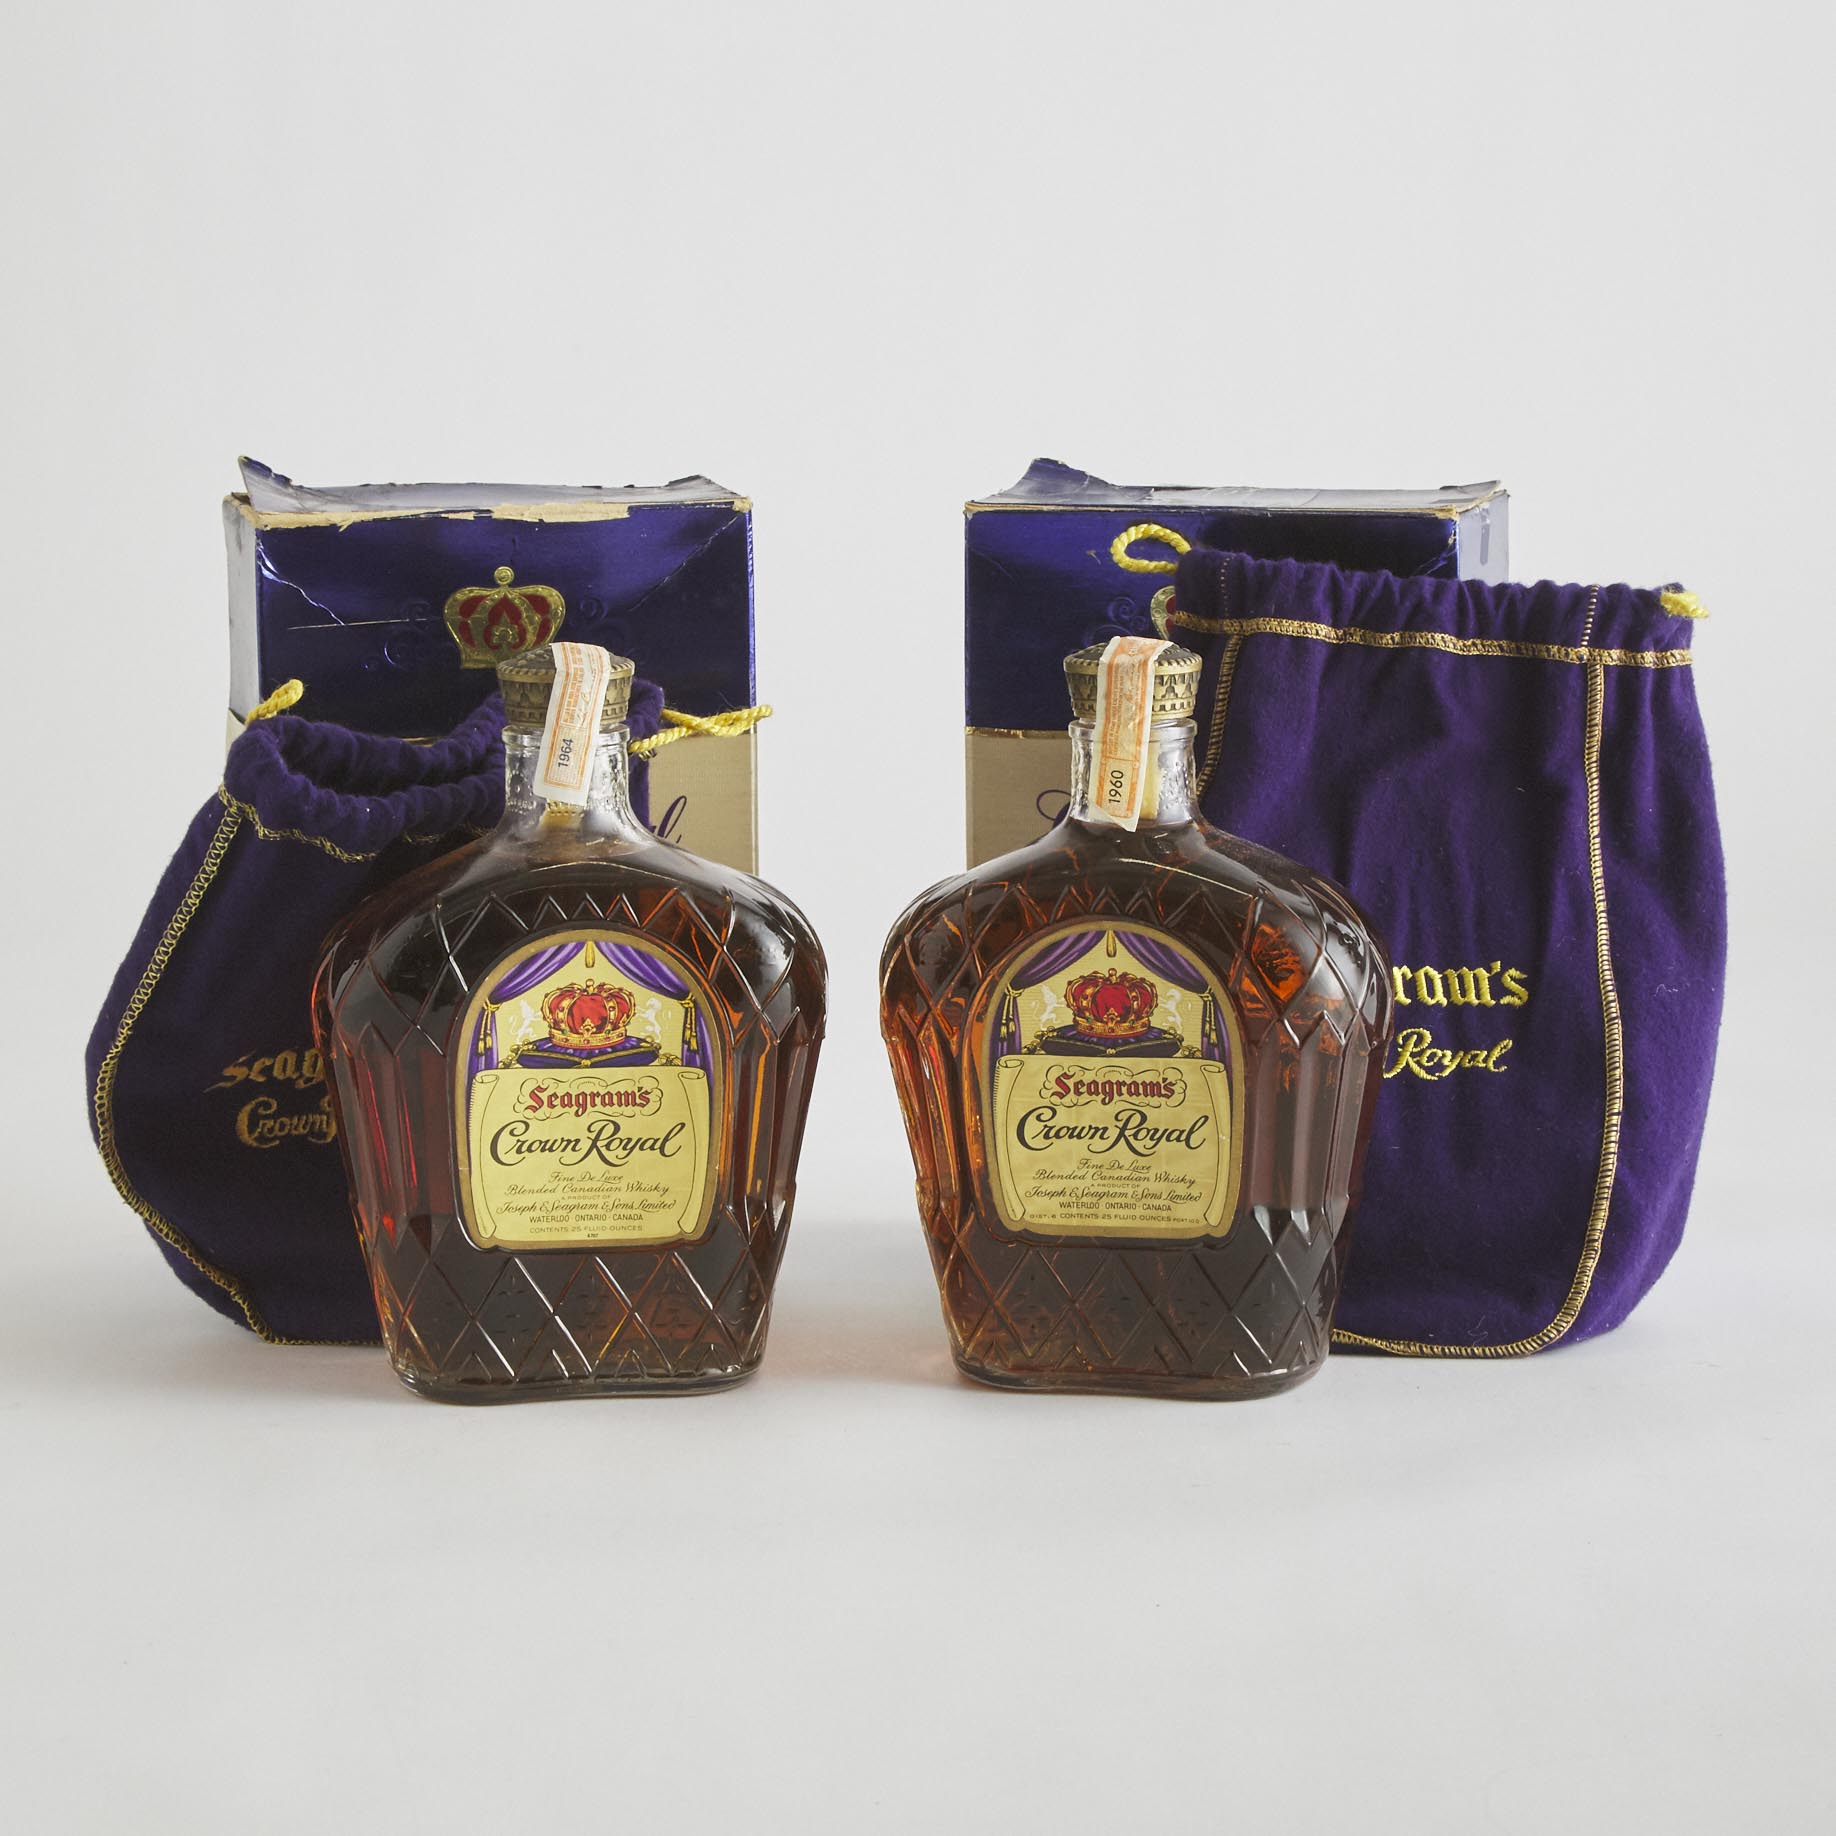 SEAGRAM’S CROWN ROYAL CANADIAN WHISKY (ONE 25 OZ)
SEAGRAM’S CROWN ROYAL CANADIAN WHISKY (ONE 25 OZ)